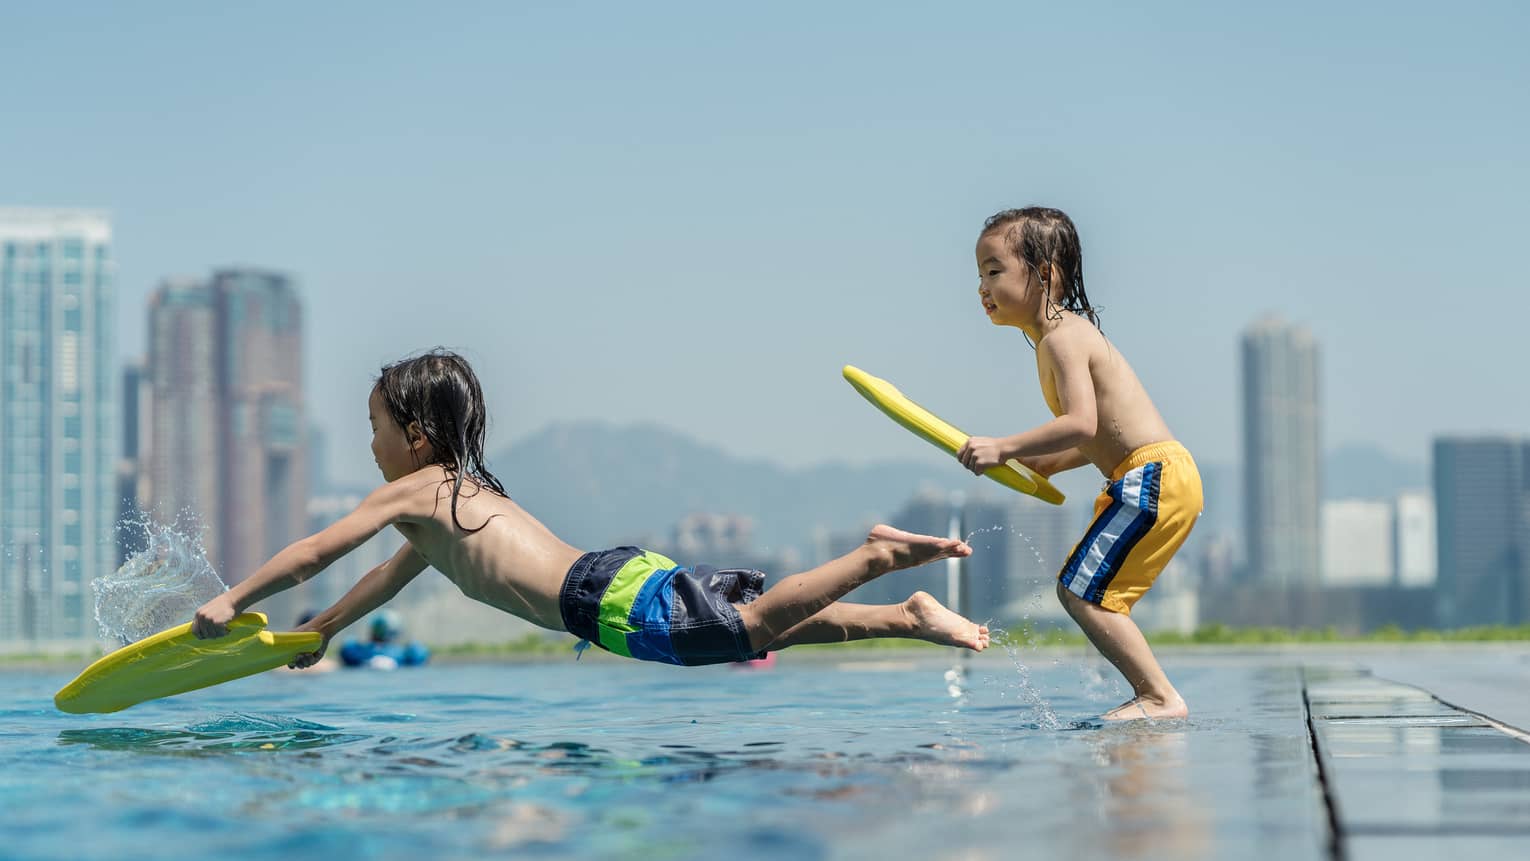 Two young boys play in outdoor hotel pool